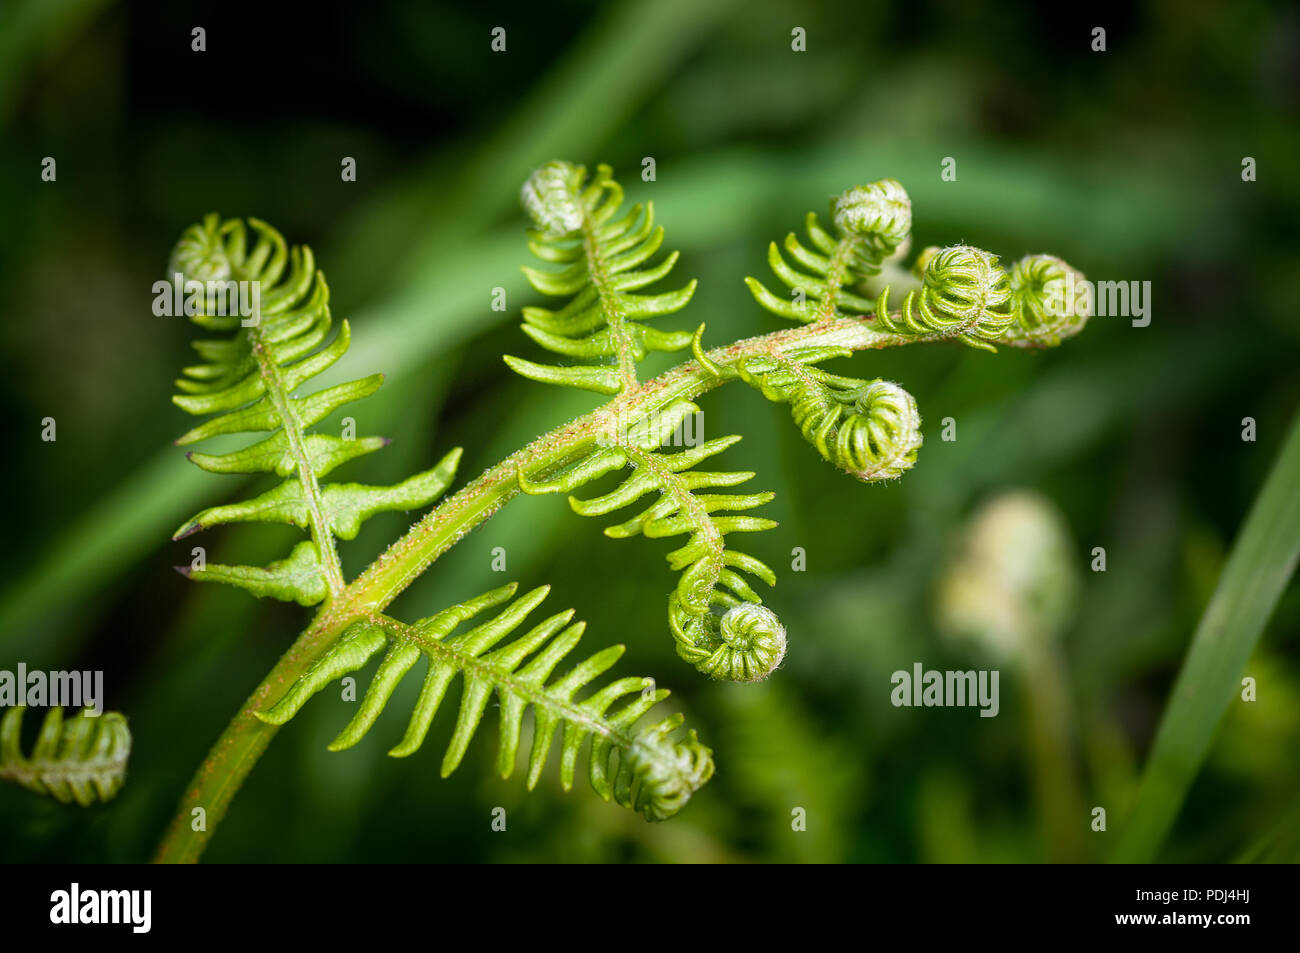 Bracken frond unfurling in spring with spirals still curled at its ends. Stock Photo